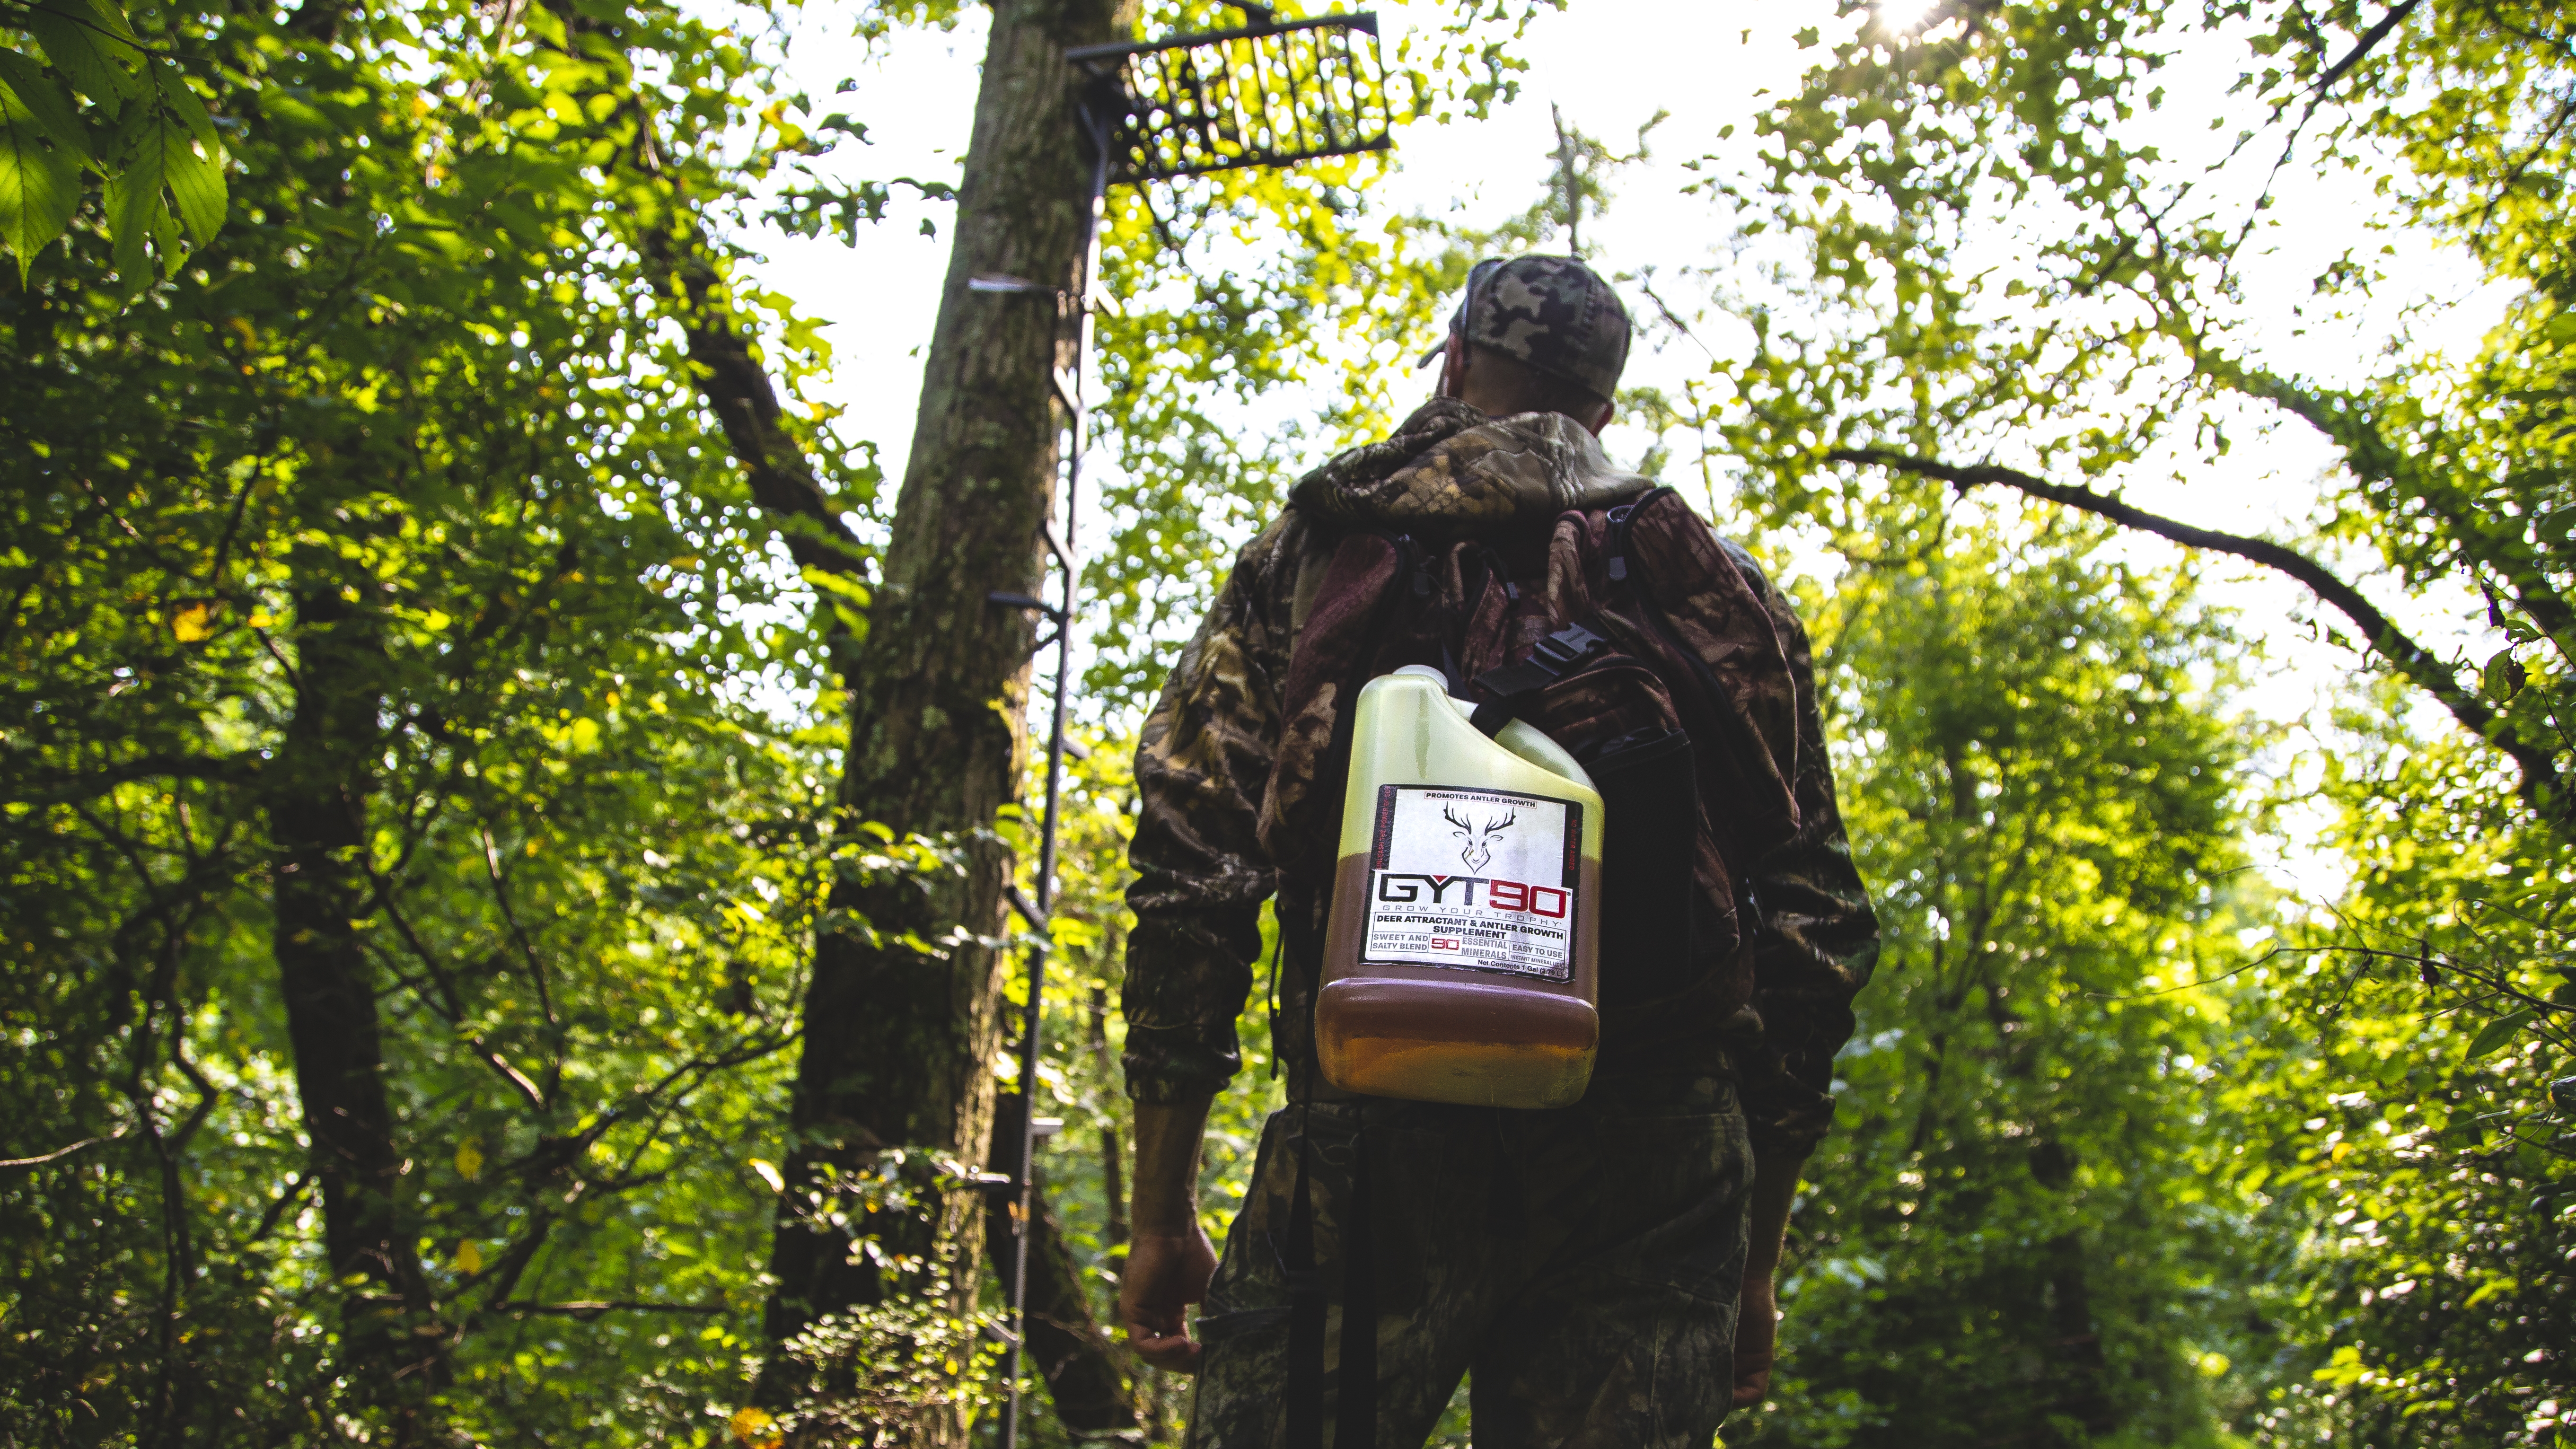 How to Turn Summer Mineral Sites into Attractive Hunting Sites | GYT90